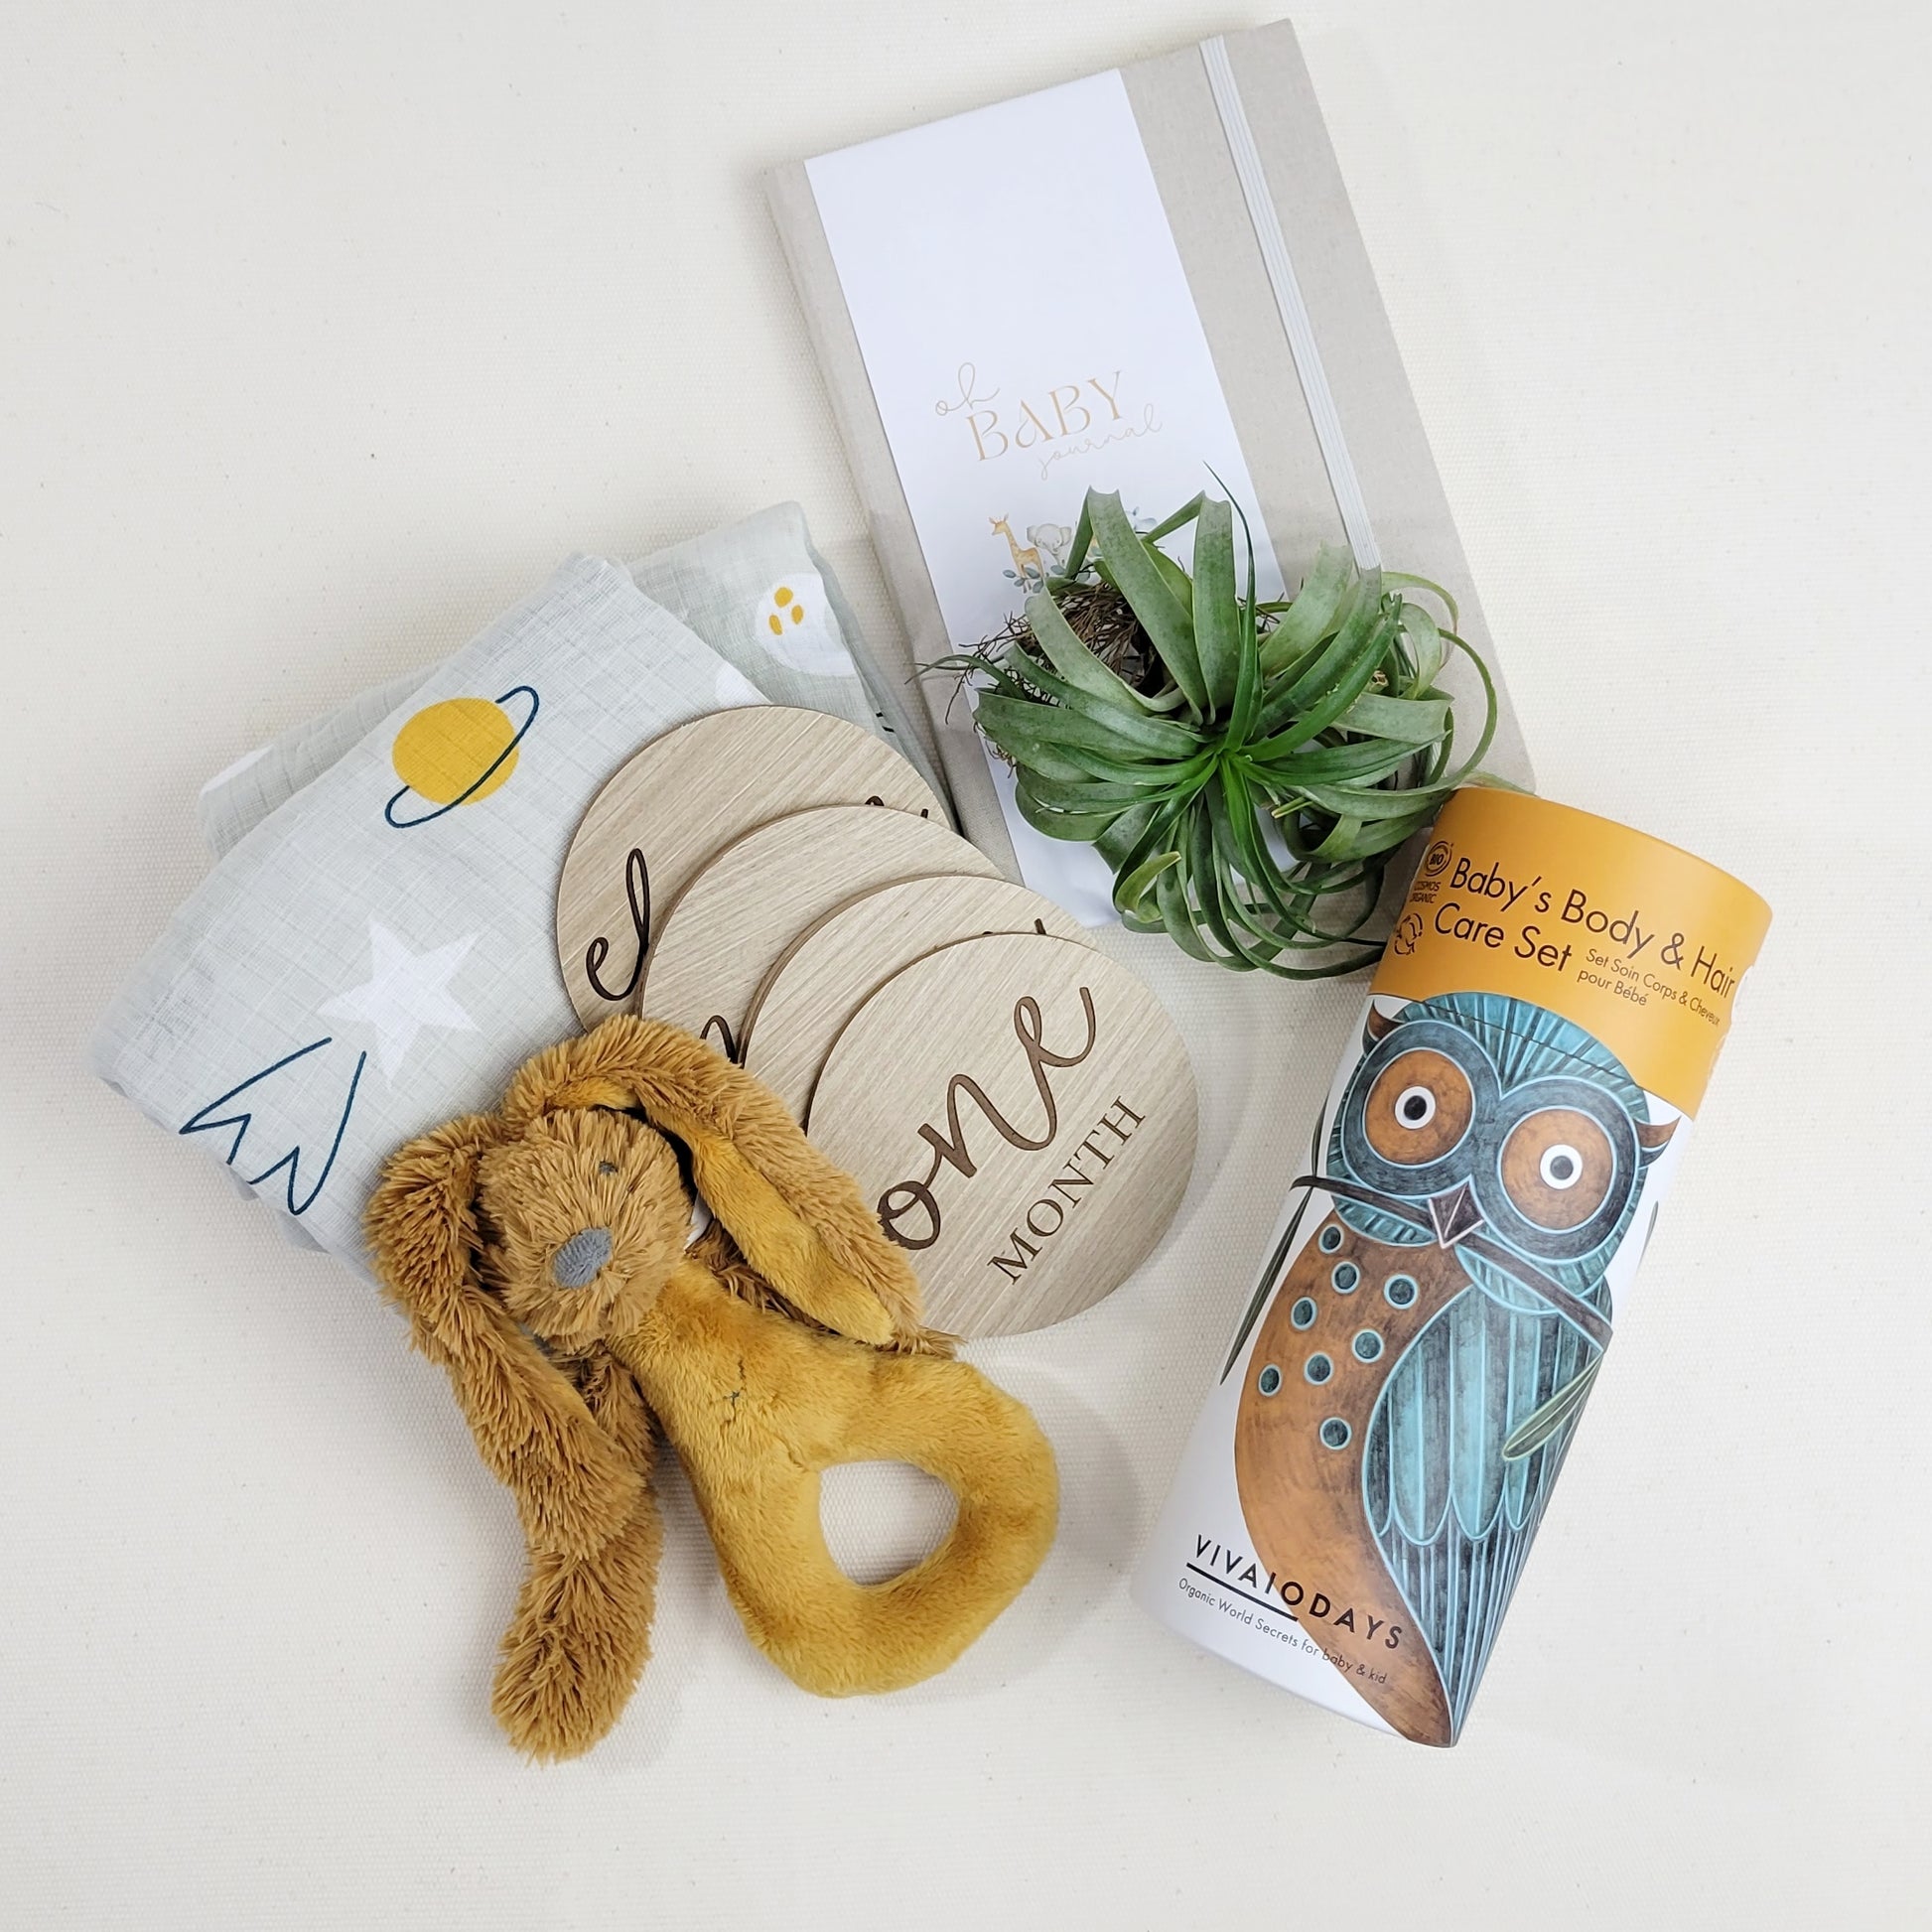 deconstructed baby gift care package from linden square with rattle, baby shampoo care set, milestone markers, swaddle, journal and plant